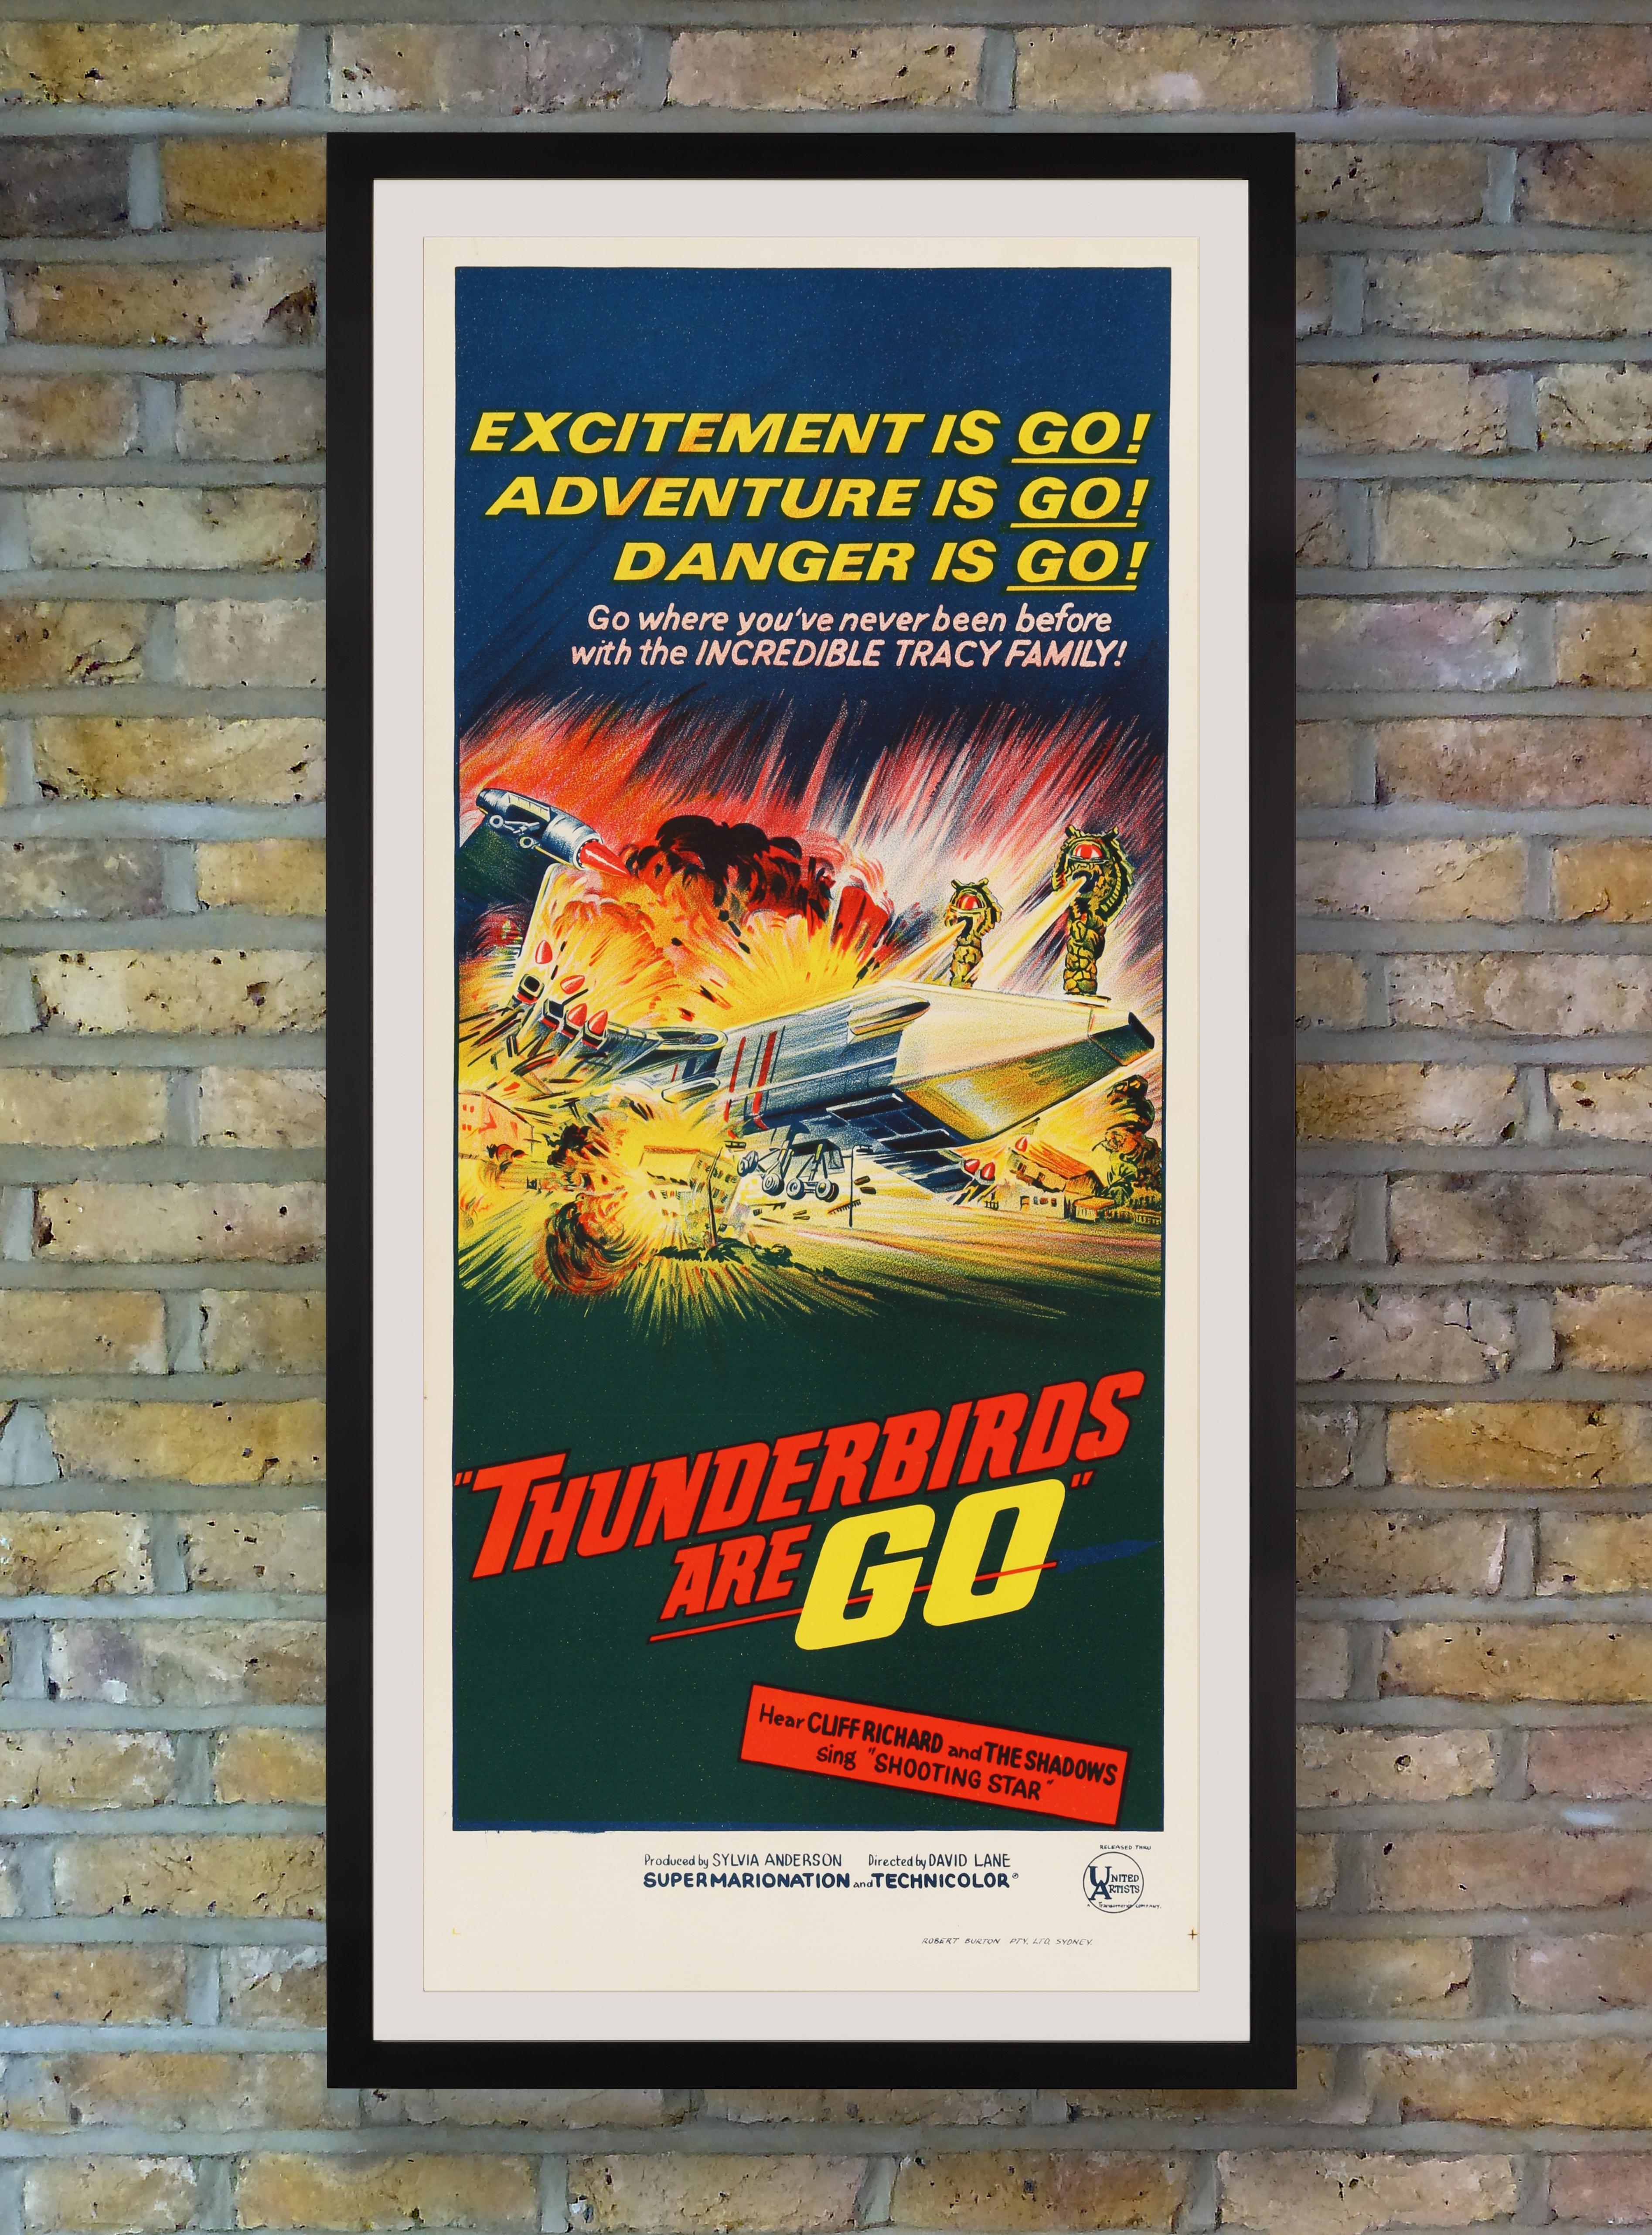 Printed in stunning stone lithography, this explosive Australian Daybill poster advertised the first full length feature film based on the British sci-fi Supermarionation television series 'Thunderbirds.' Created by Gerry and Sylvia Anderson,